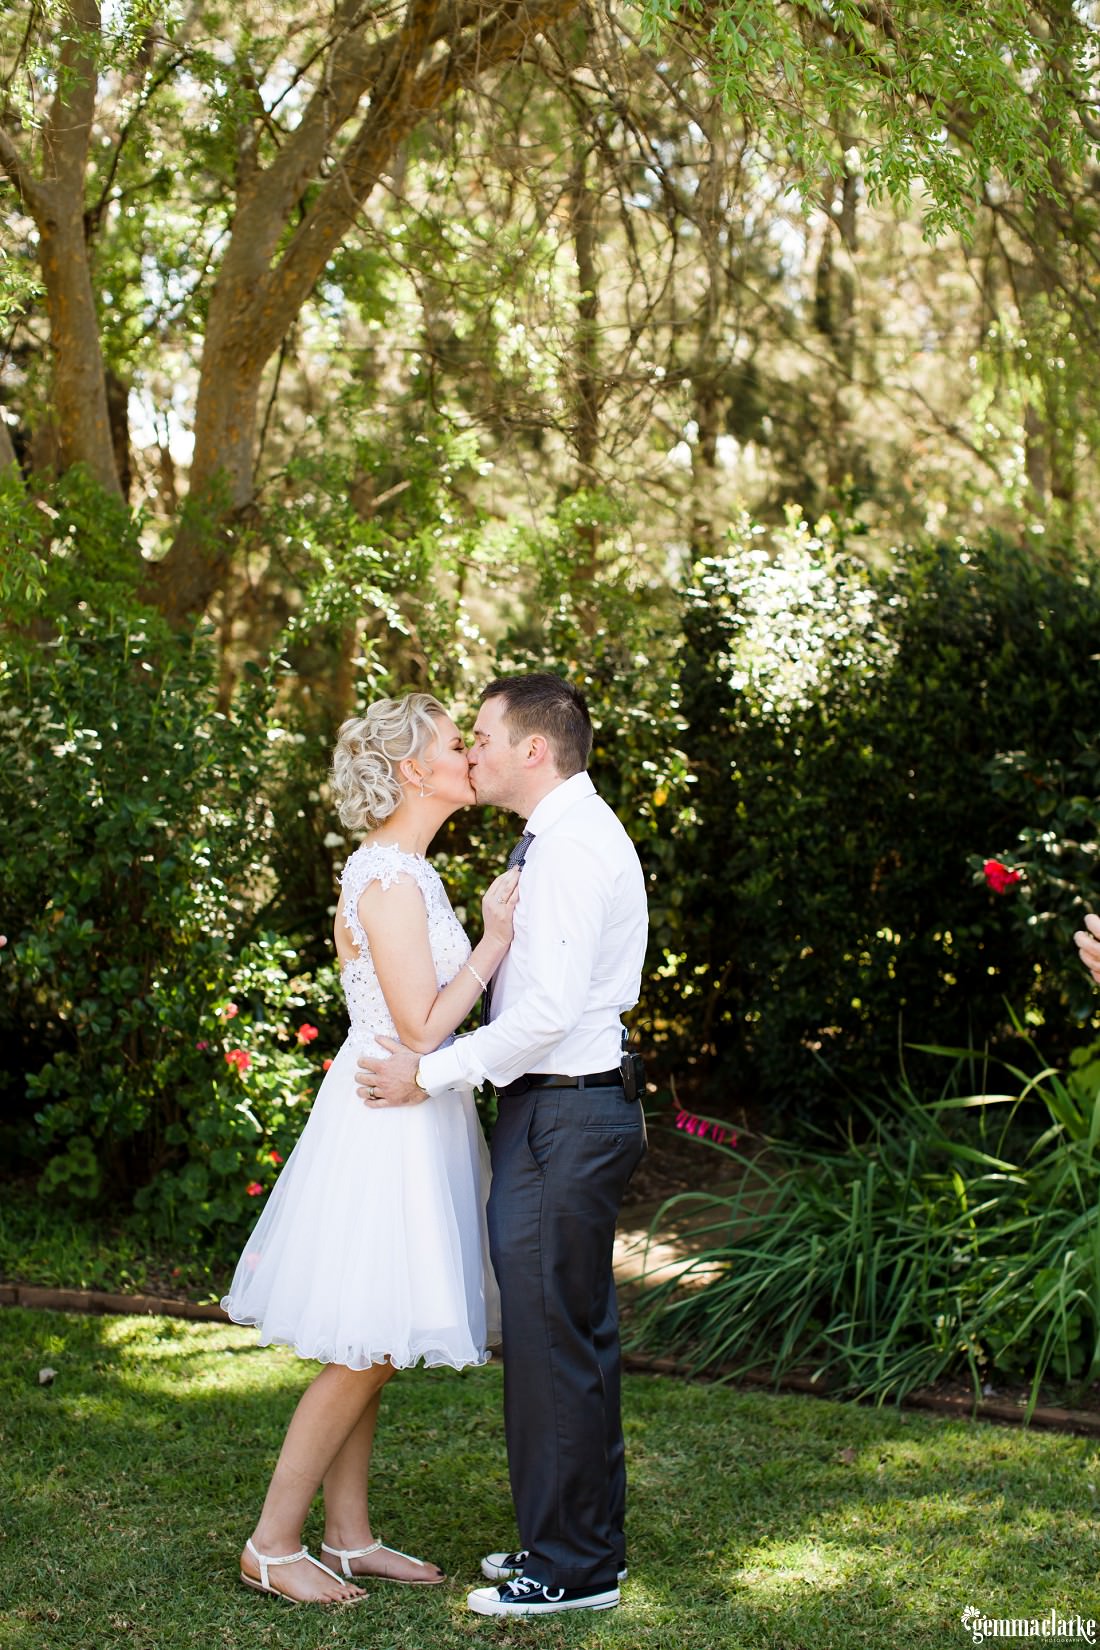 A bride and groom kiss at their wedding ceremony